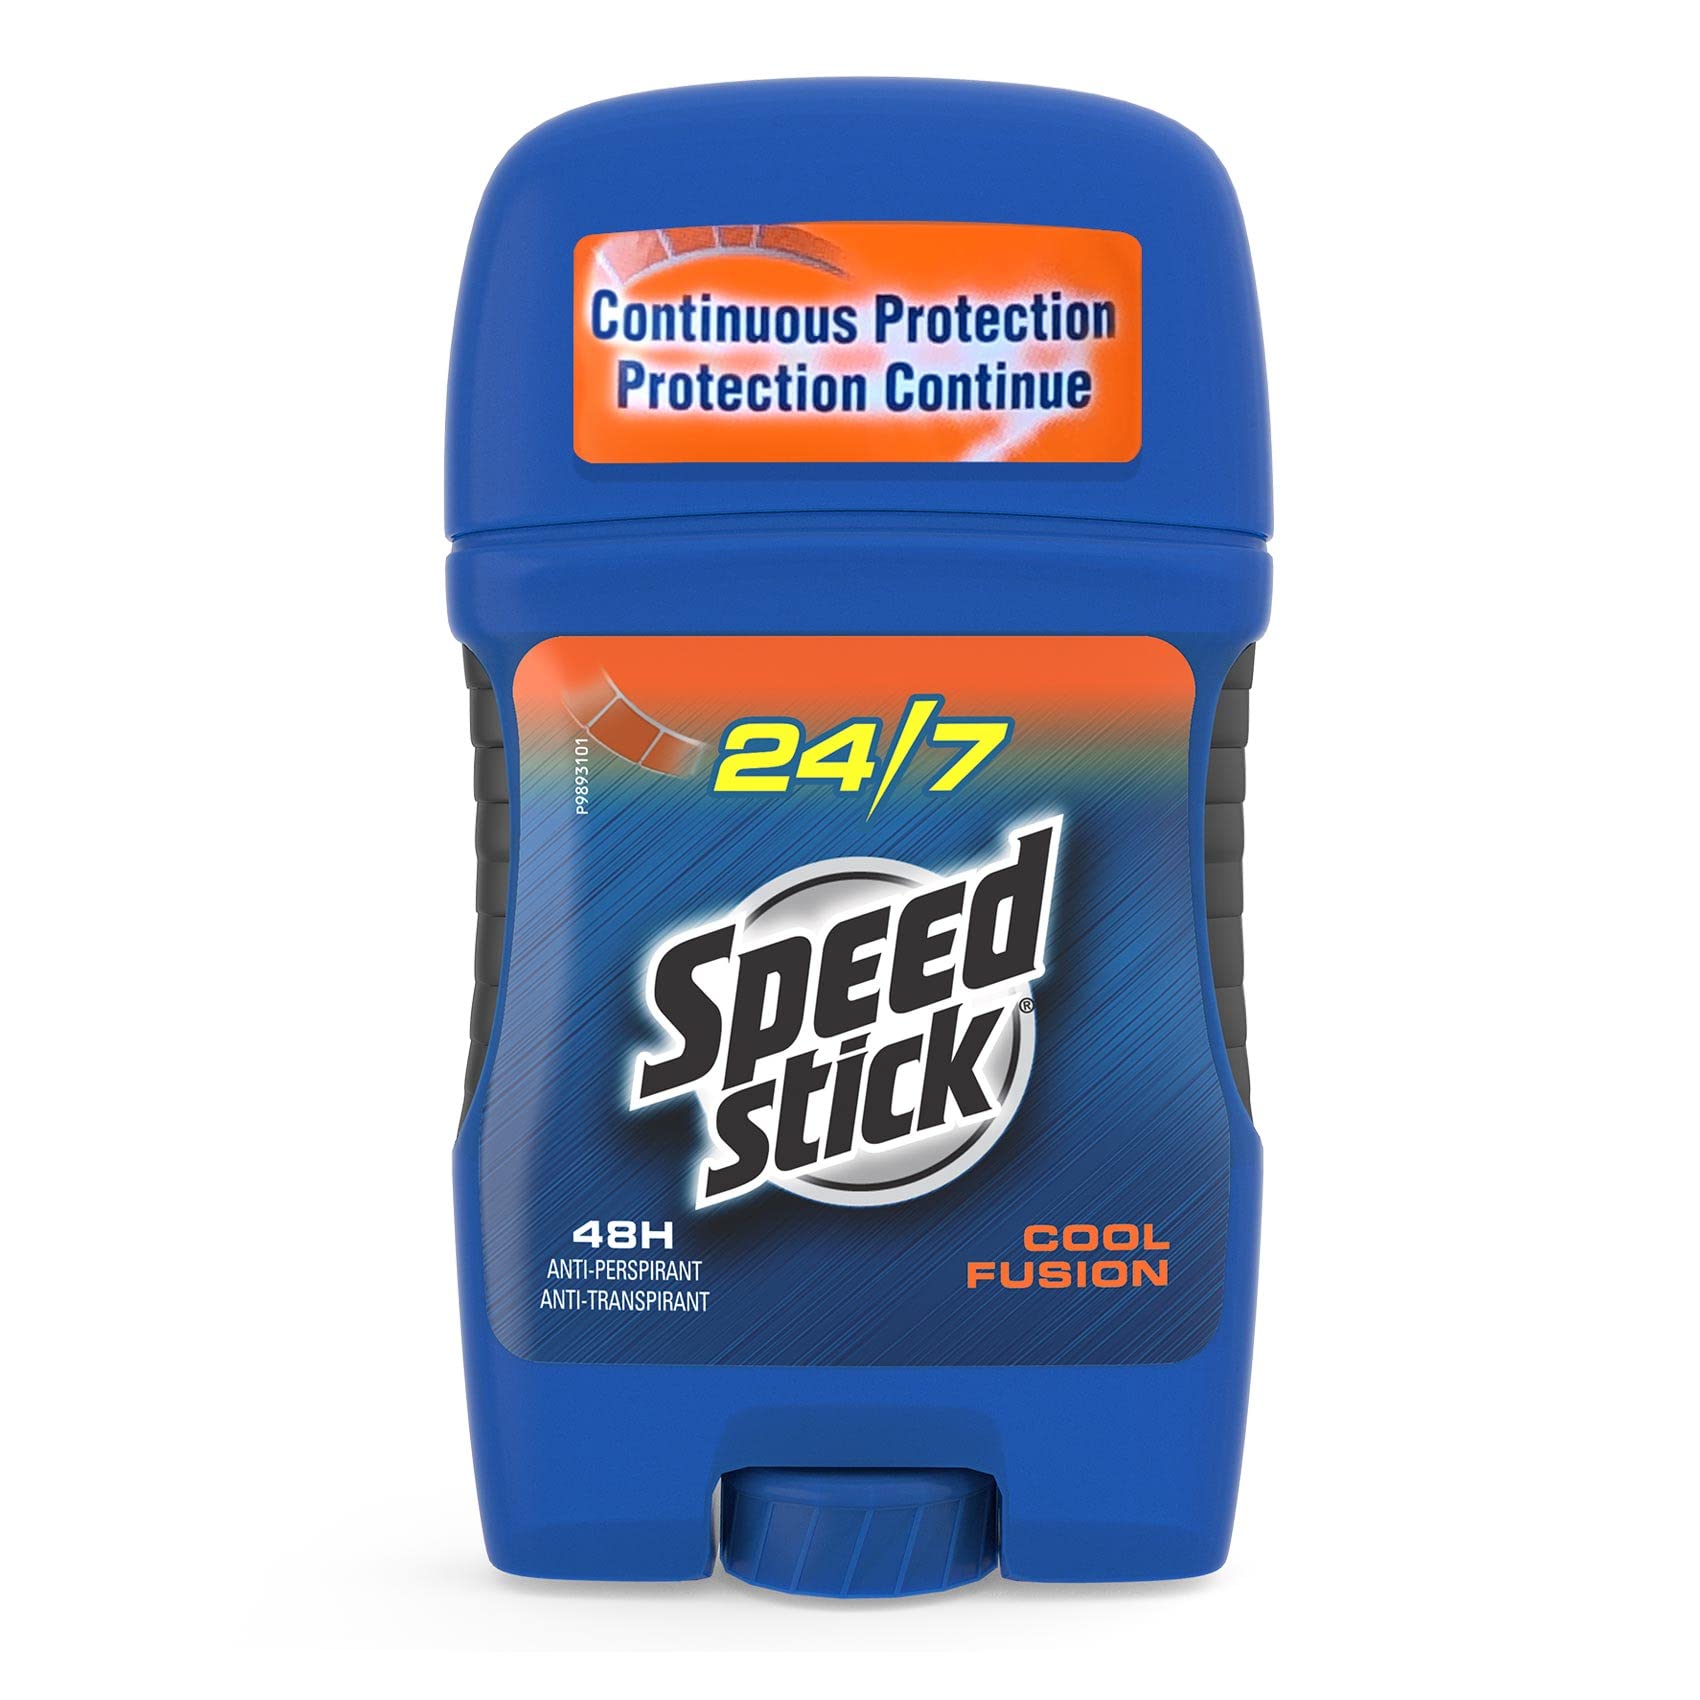 SPEED STICK 24 7 COOL FUSION 48H| 50GM